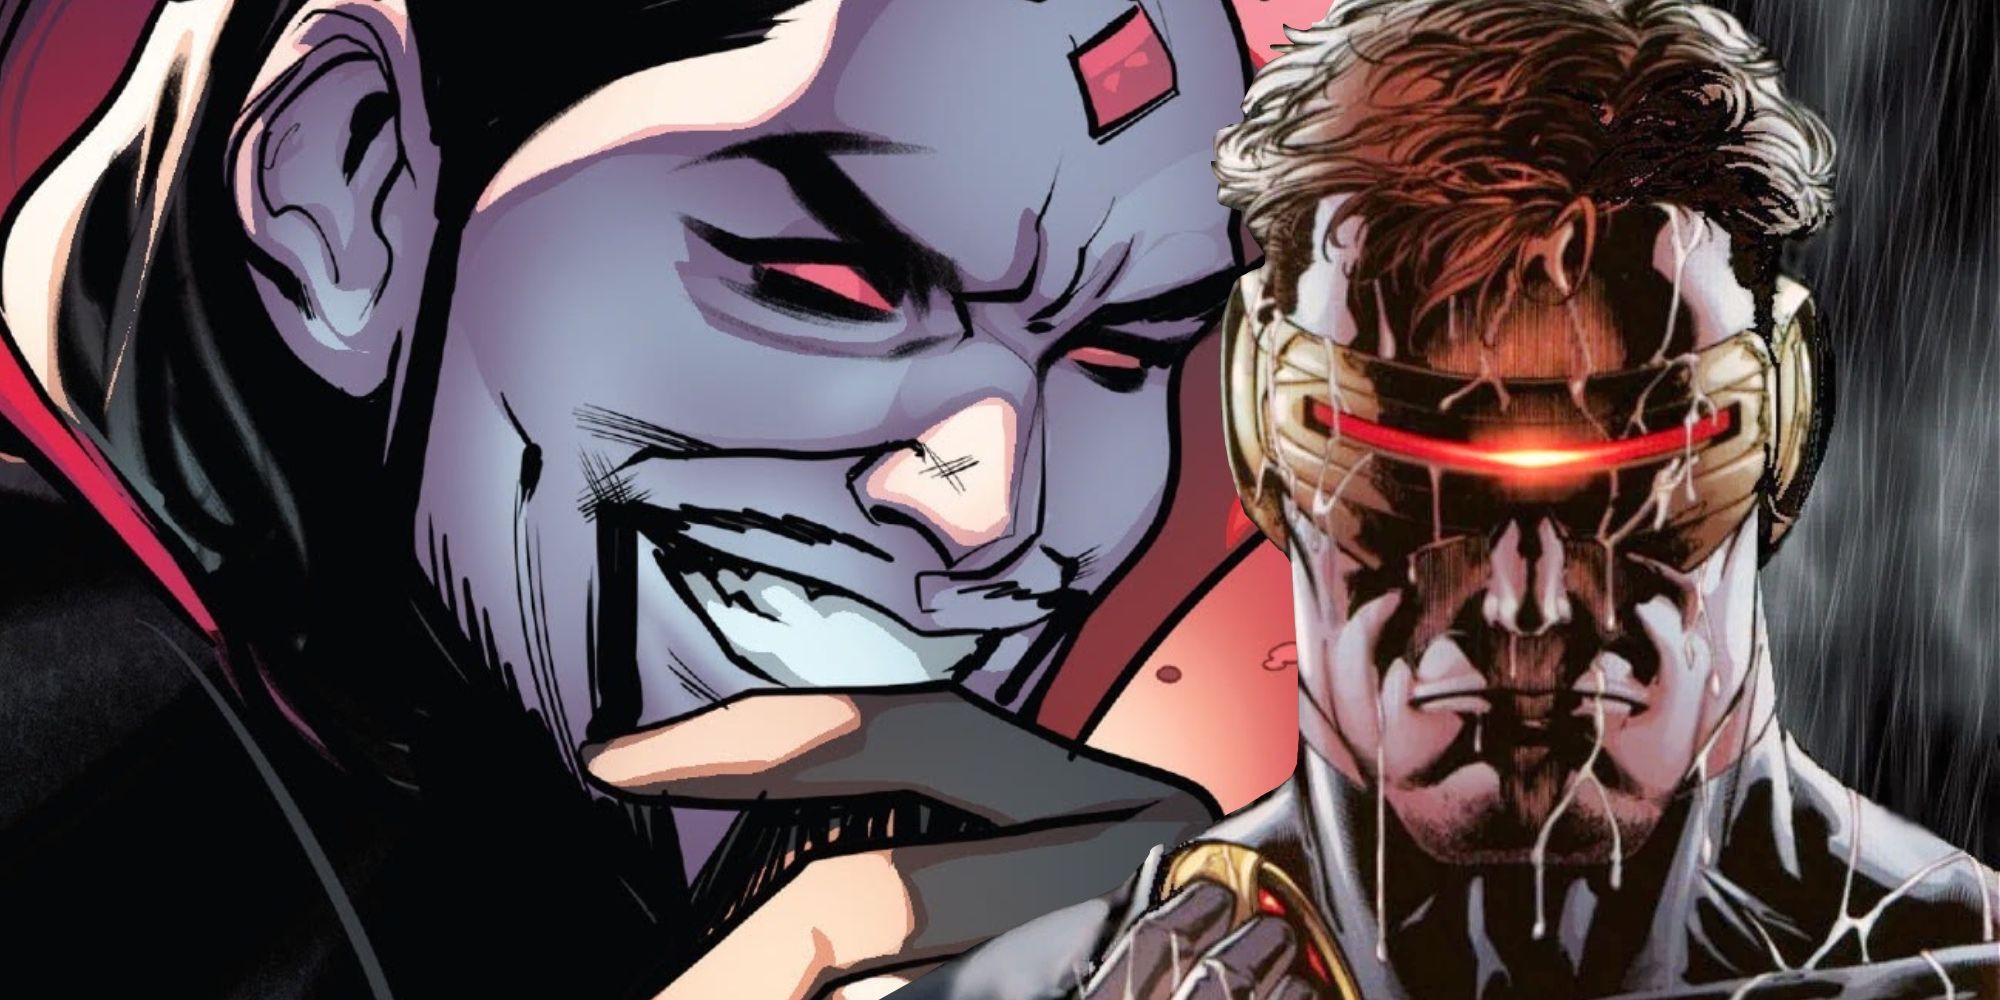 Cyclops' Powers Get a Horrifying Twist in Gross Mutant Weapon Featured